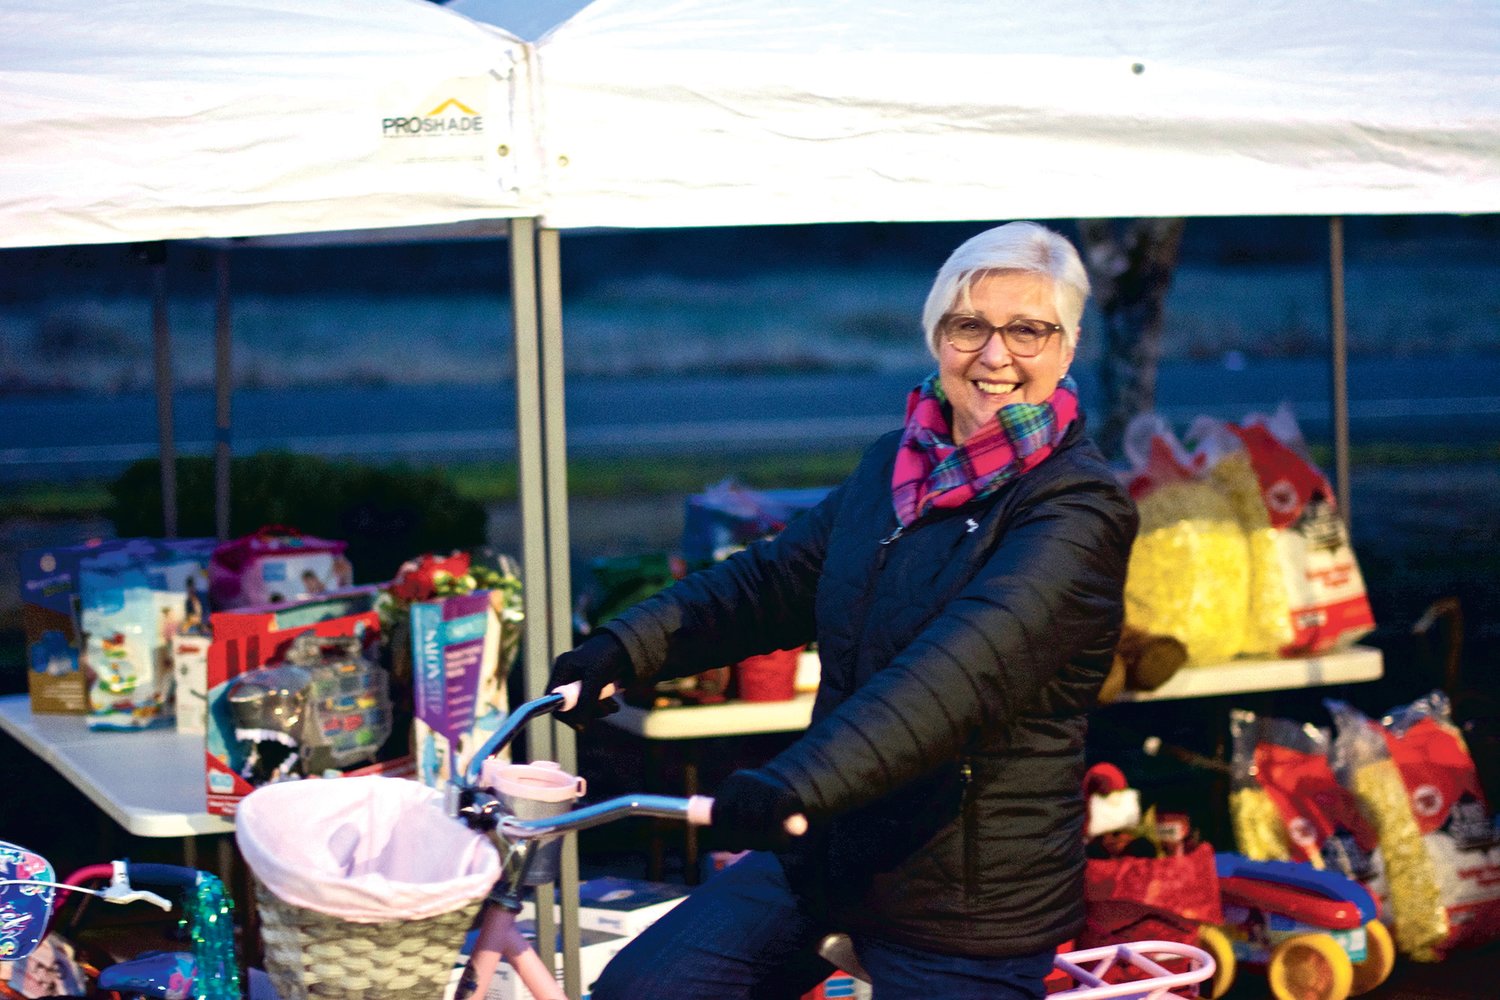 Julie Shaffley, of the Centralia-Chehalis Chamber of Commerce shows off a bike that was given away as a prize for the chamber’s “Choose Local Black Friday” event Lewis County Mall Wednesday night.